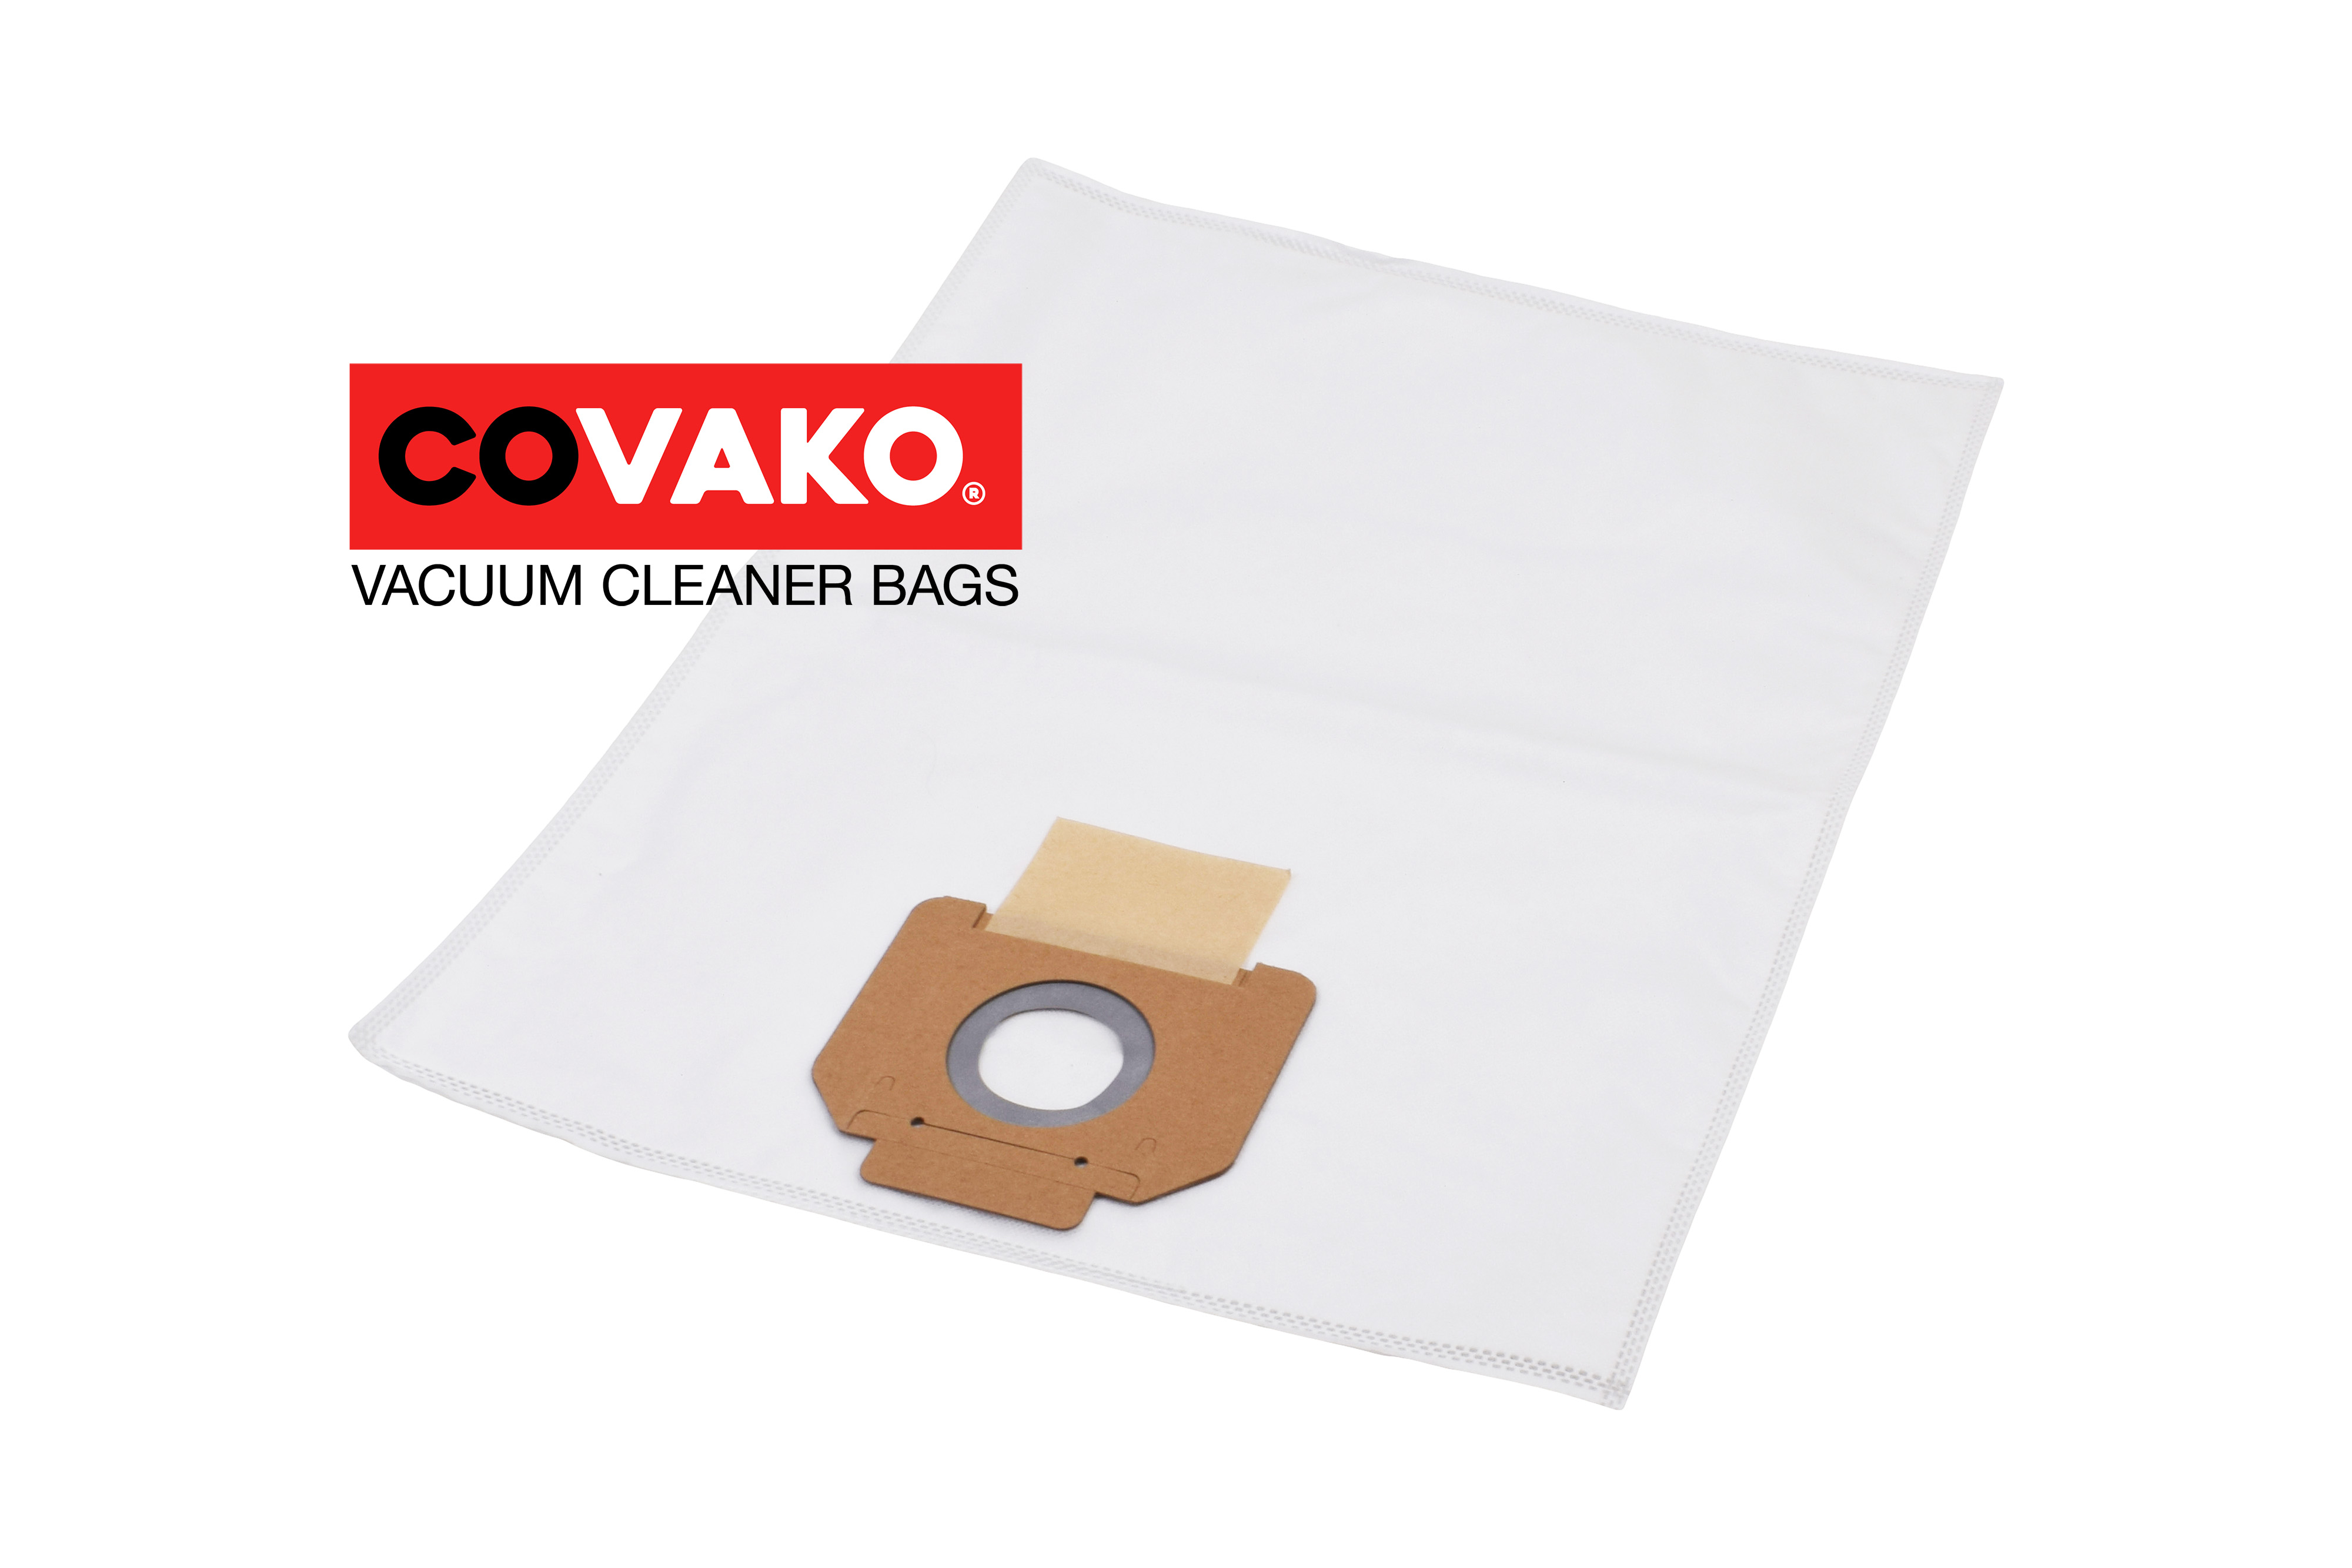 Kärcher NT 361 Eco BS / Synthesis - Kärcher vacuum cleaner bags